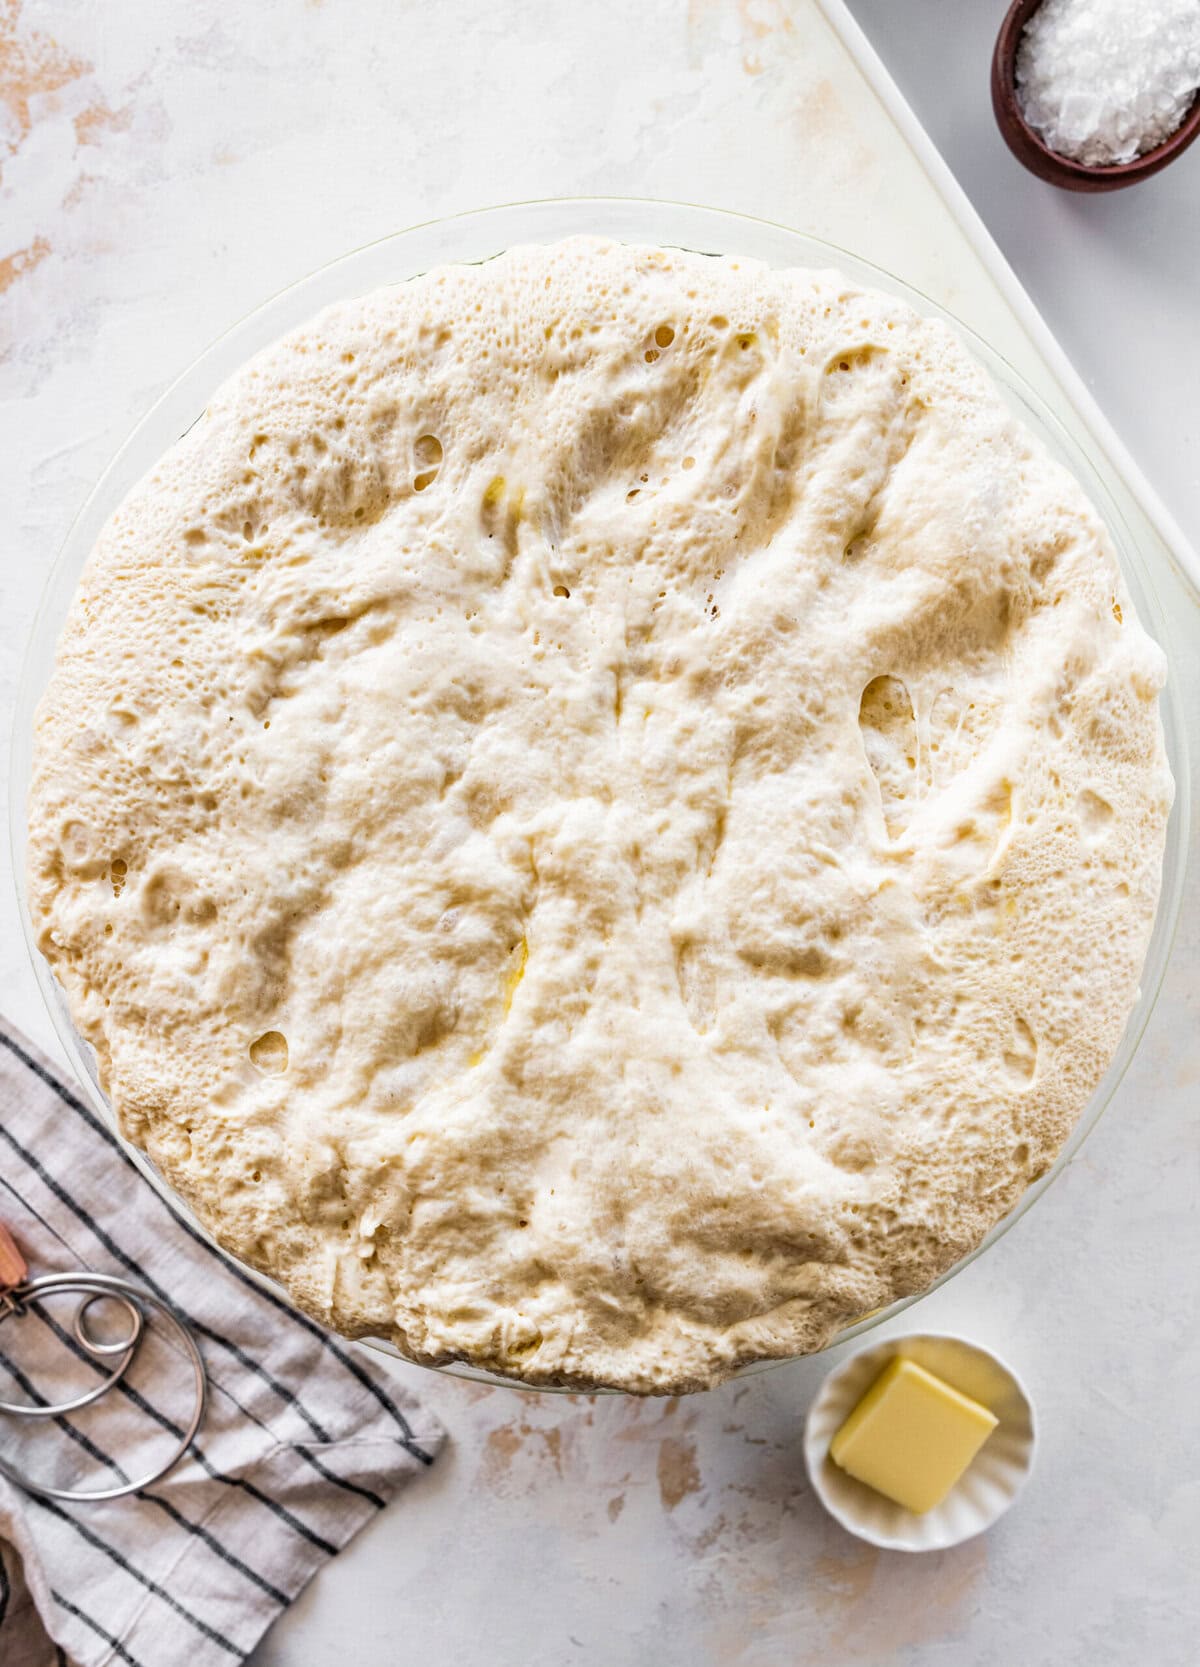 how to make no-knead focaccia bread step-by-step: let the dough rise in the fridge and take off the plastic cover. There will be lots of bubbles!